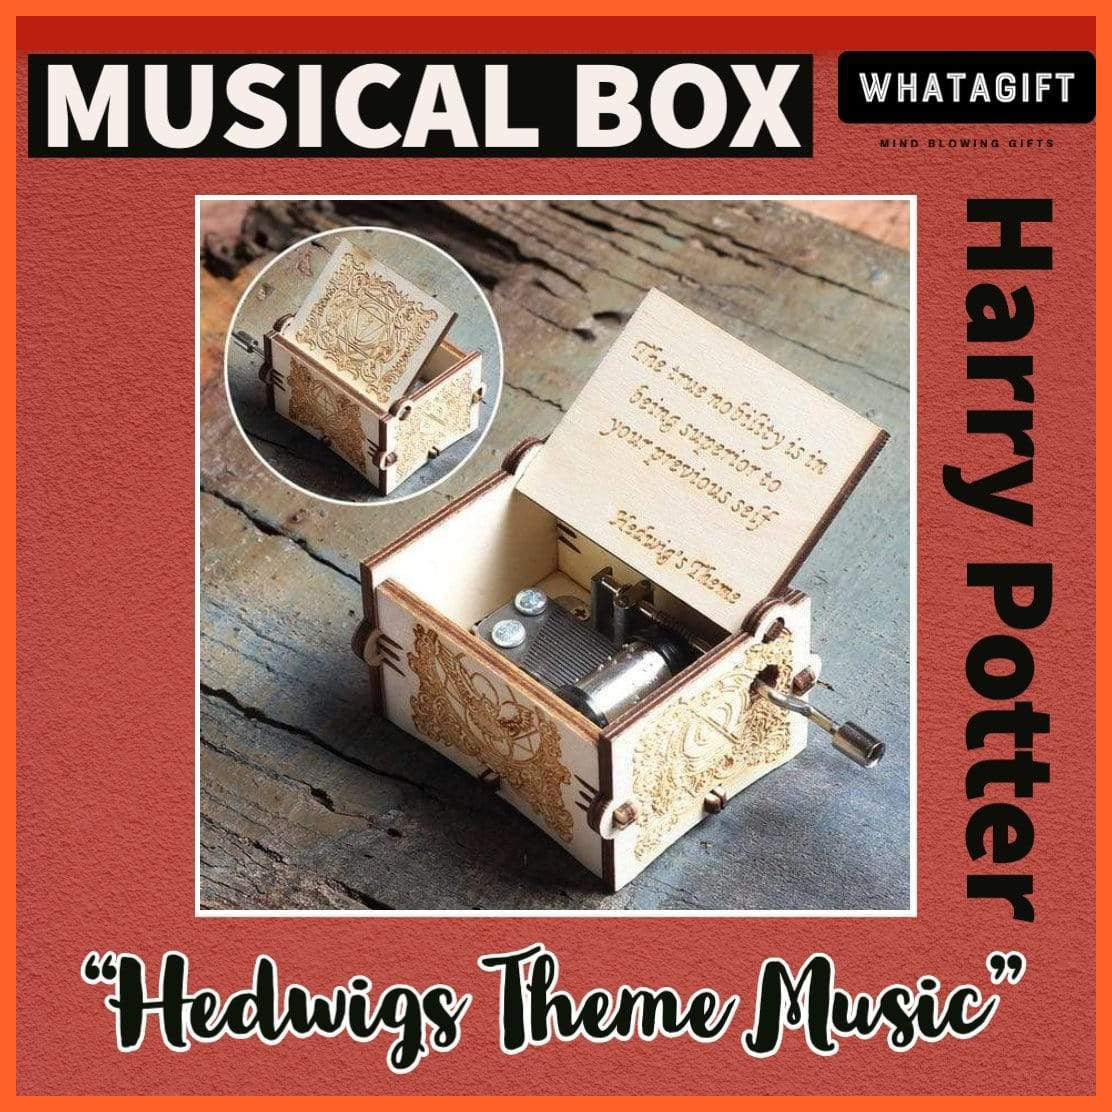 Wooden Classical Music Box Hedwigs Theme Harry Potter | whatagift.com.au.